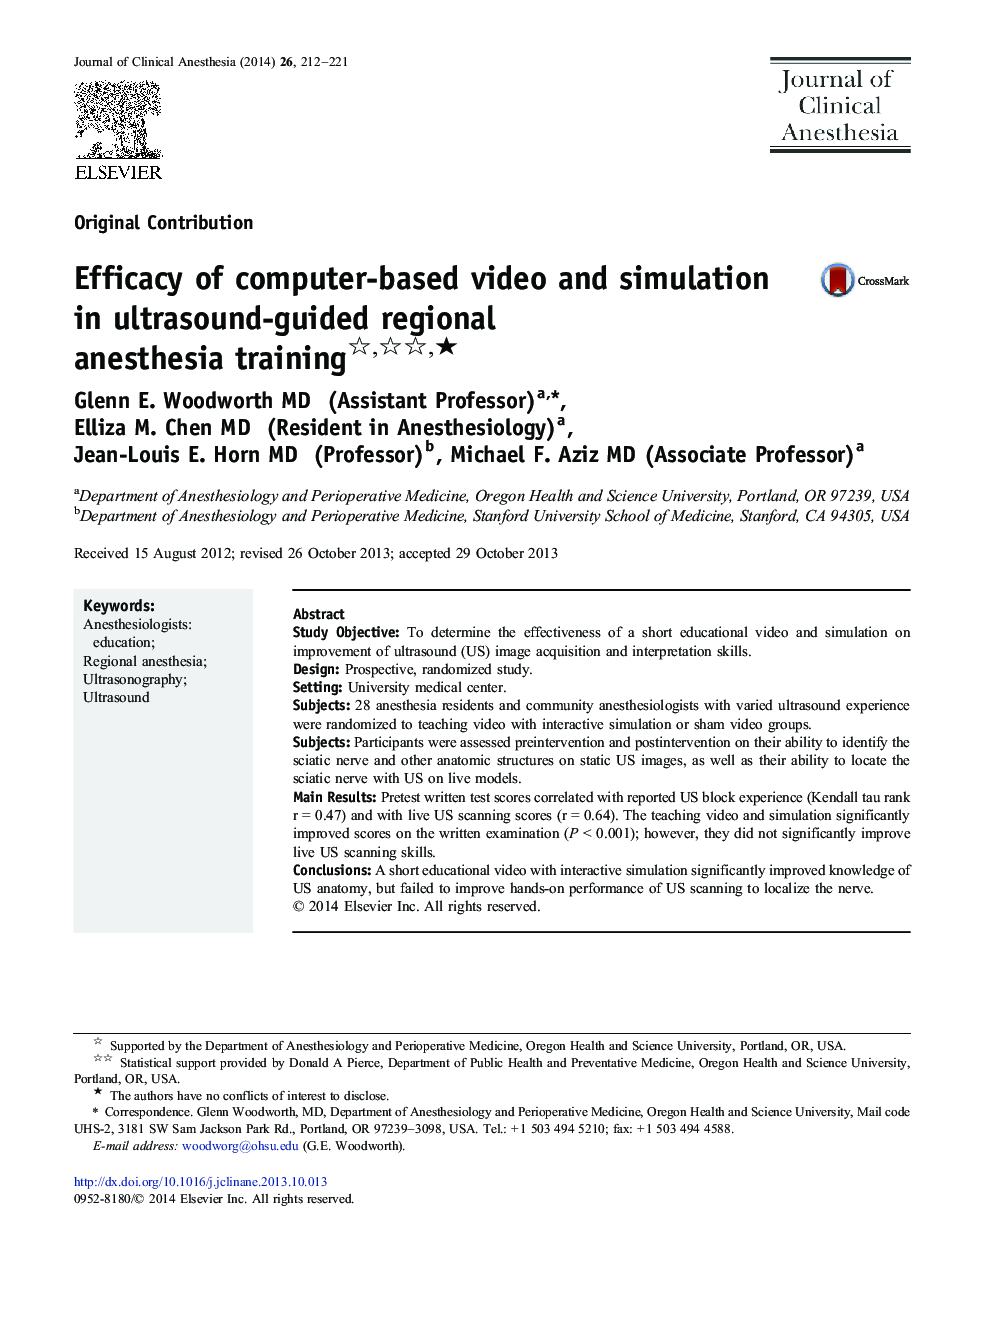 Efficacy of computer-based video and simulation in ultrasound-guided regional anesthesia training ★